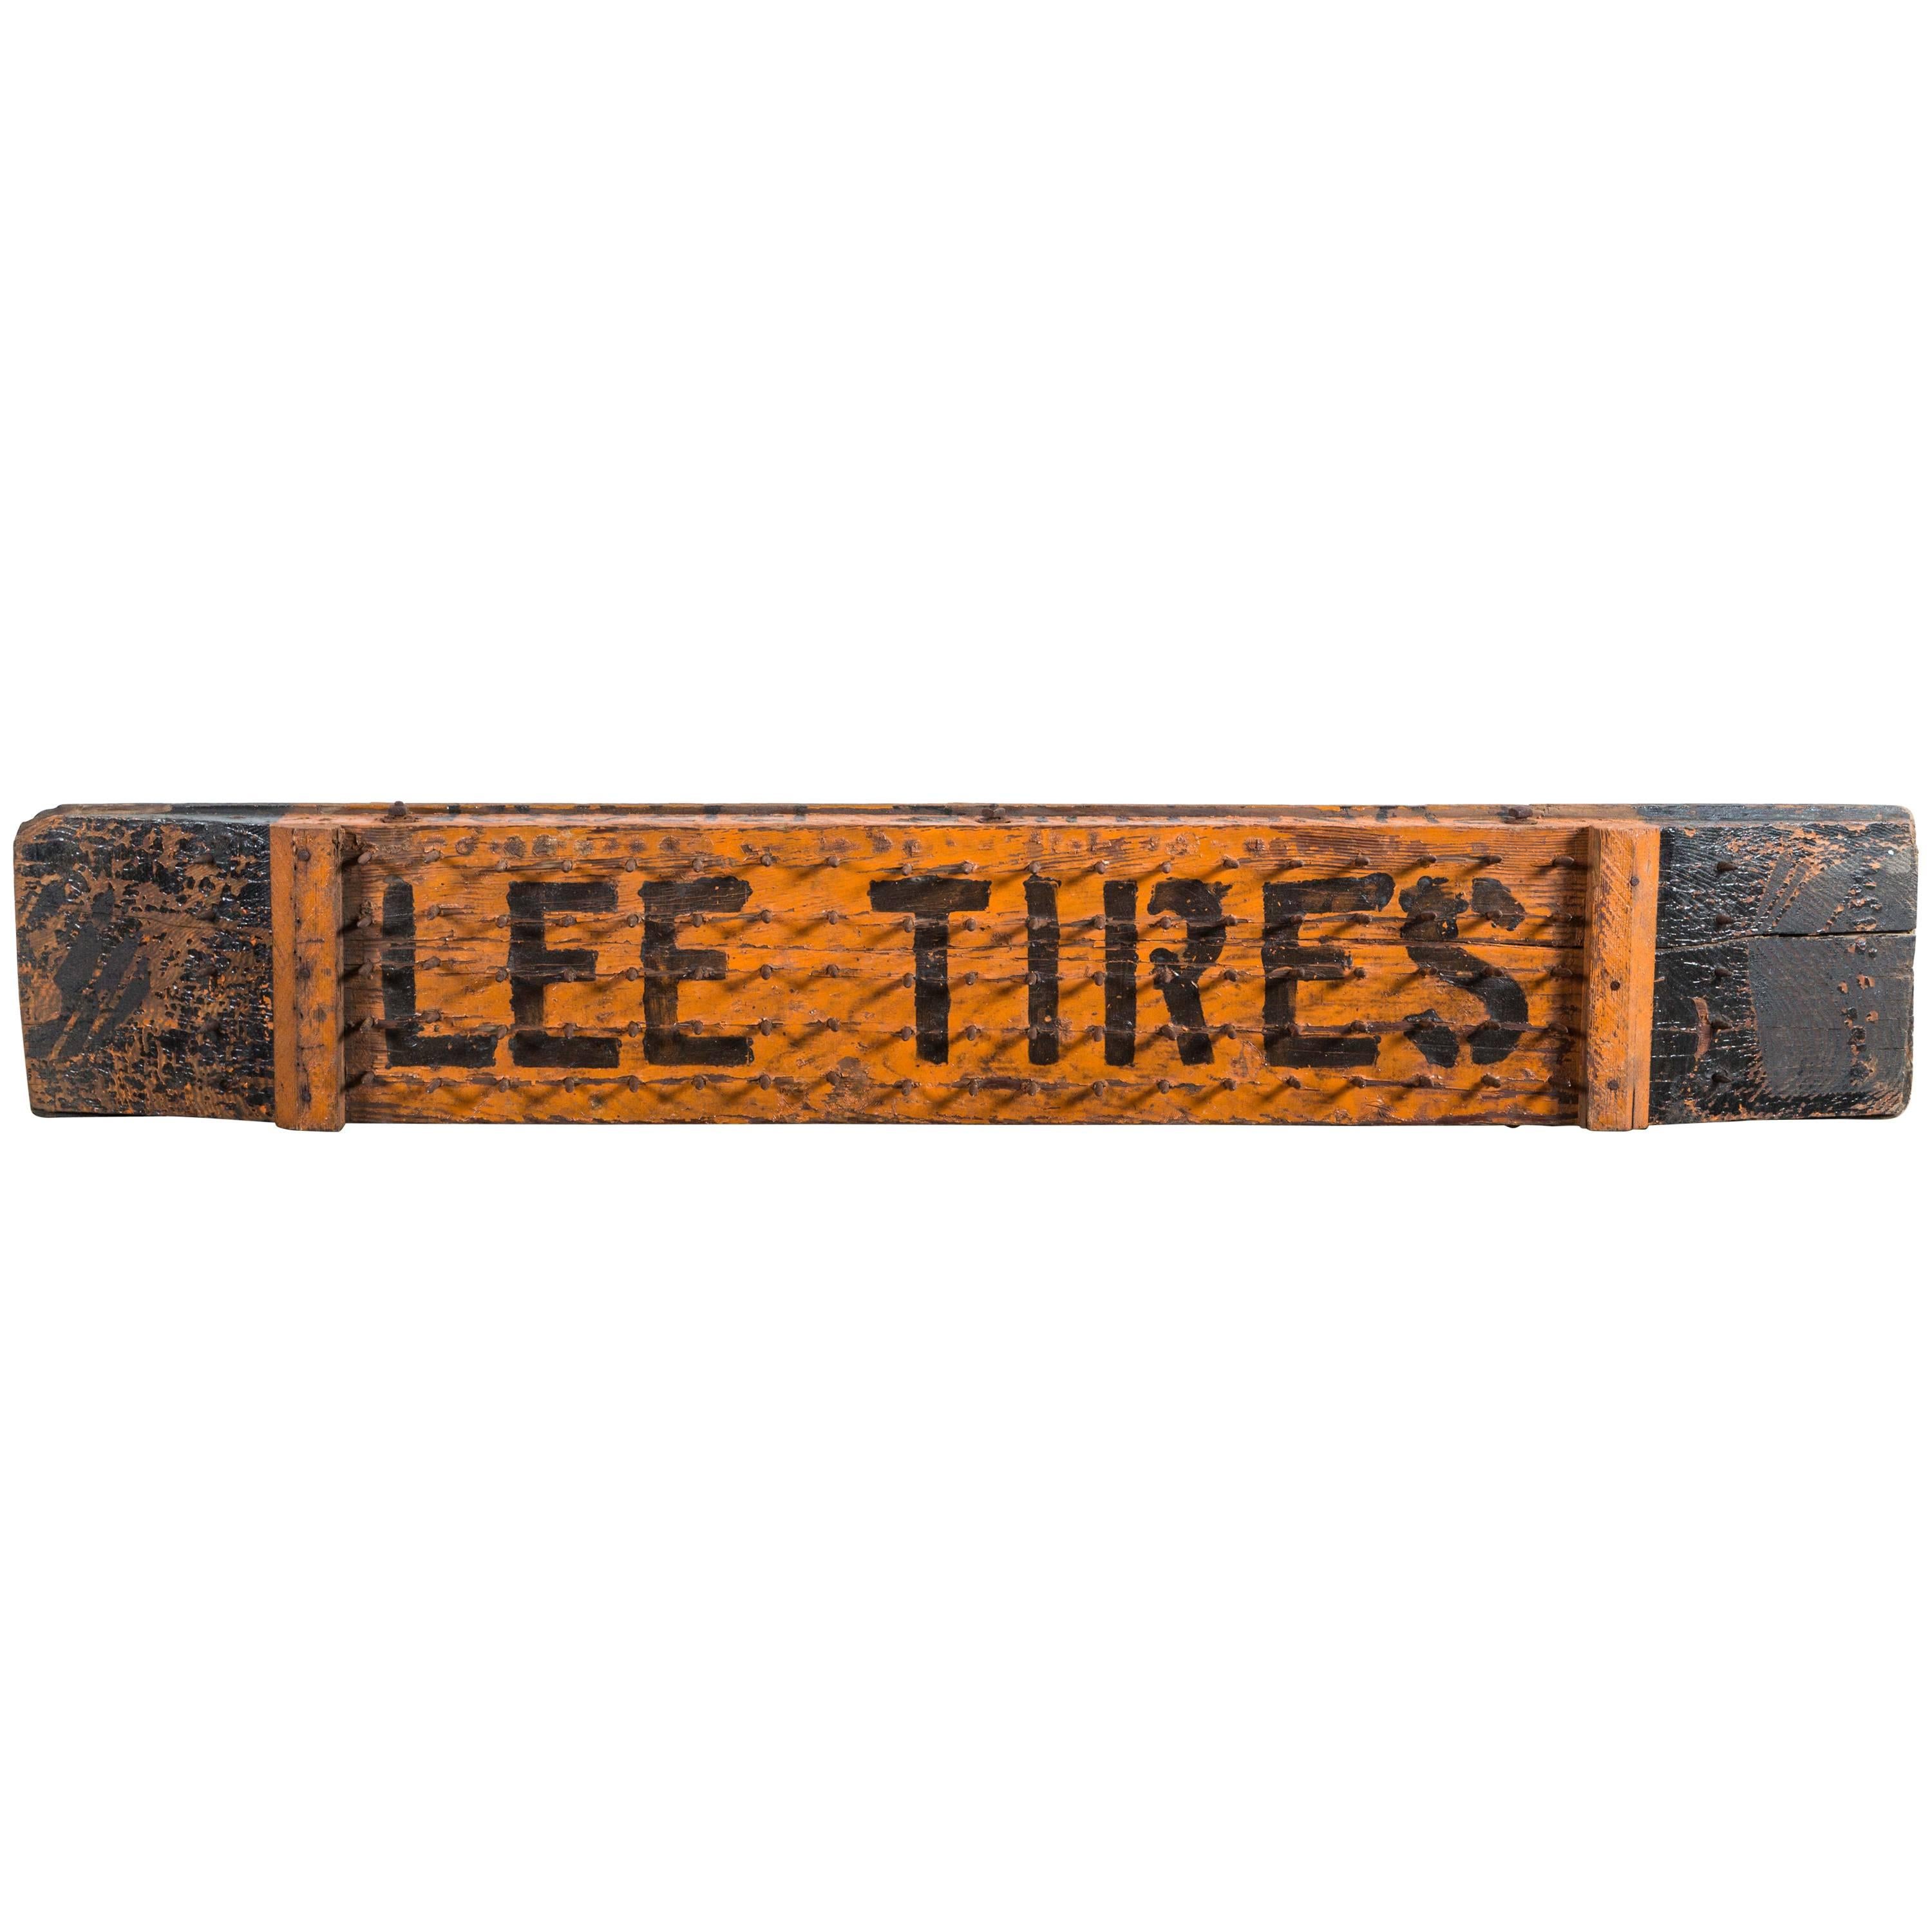 Early 20th Century Lee Tires Puncture Proof Trade Sign